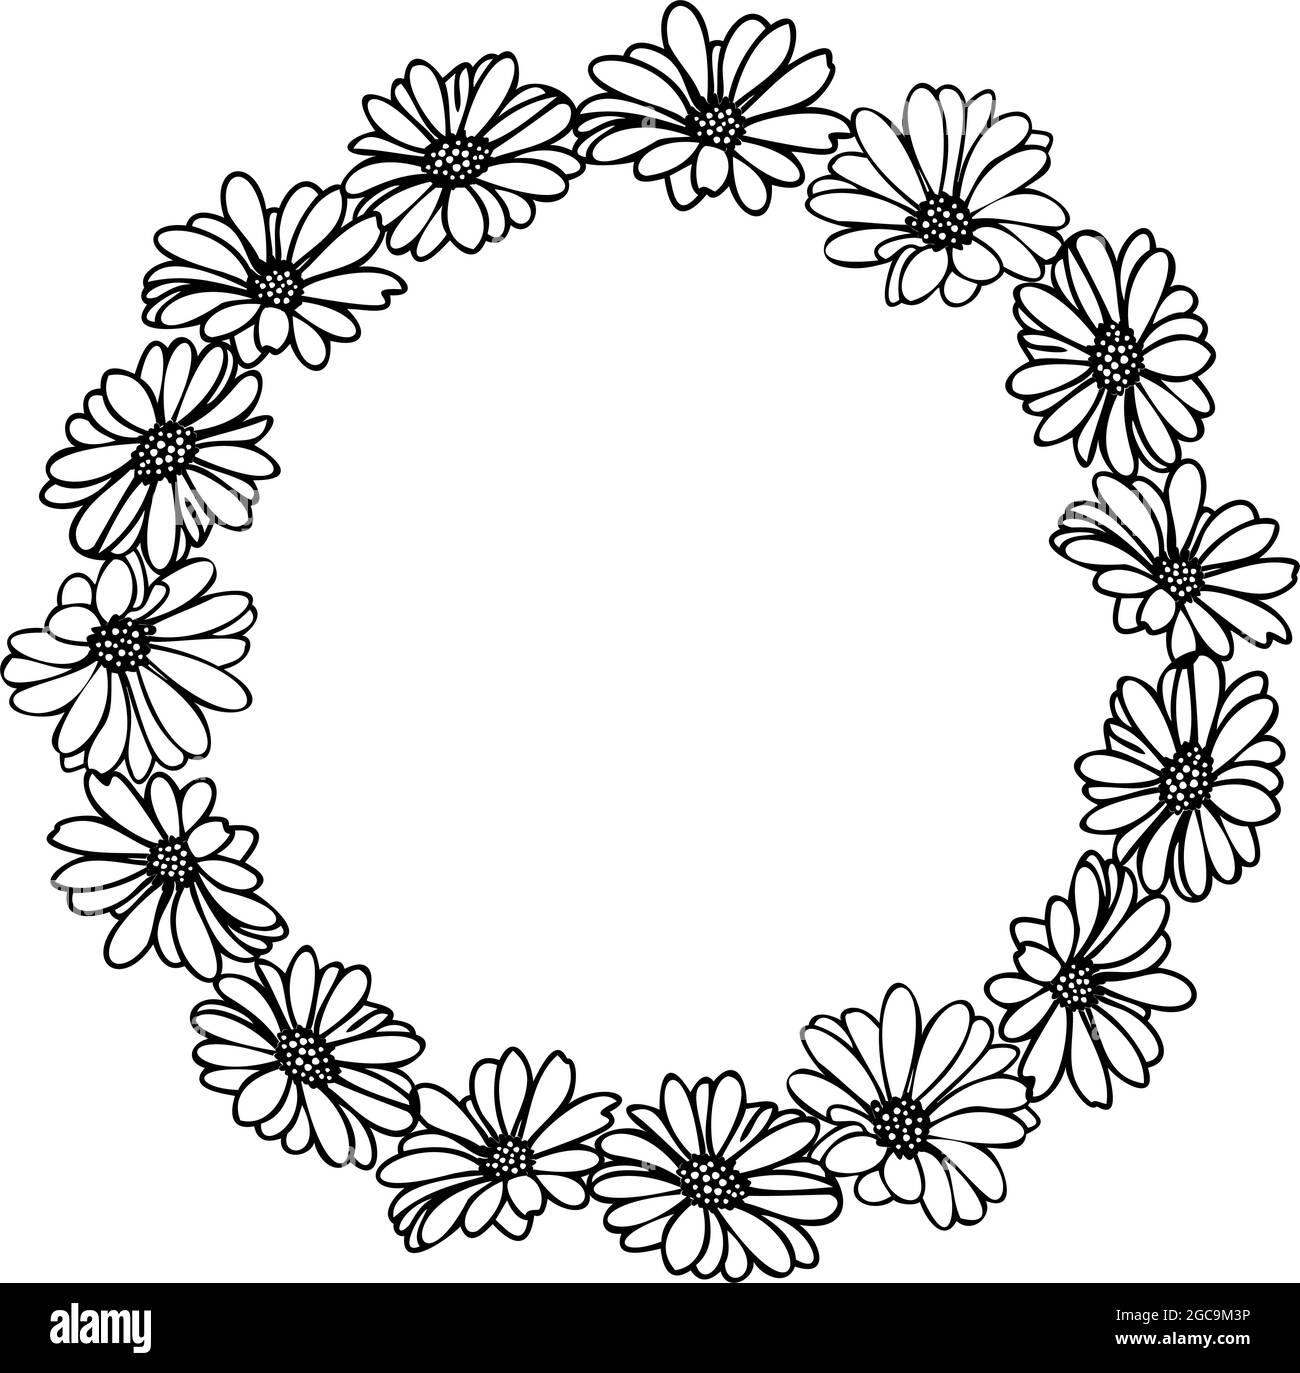 Daisy flower elements arranged on a shape of the wreath for wedding invitations cards. Stock Vector